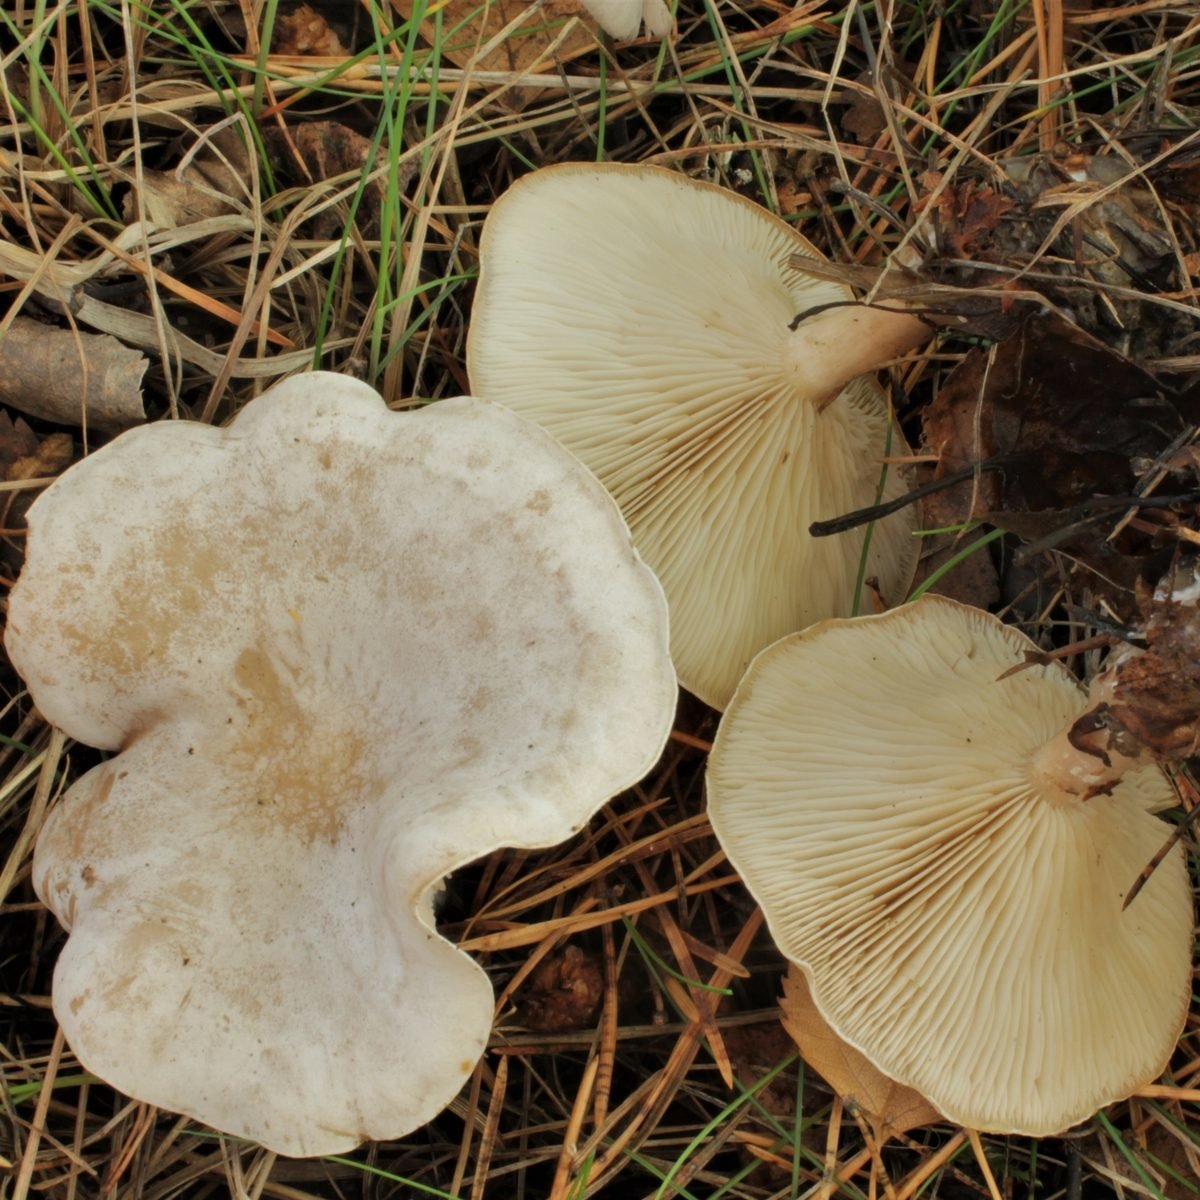 Waxy talker - Clitocybe phyllophila